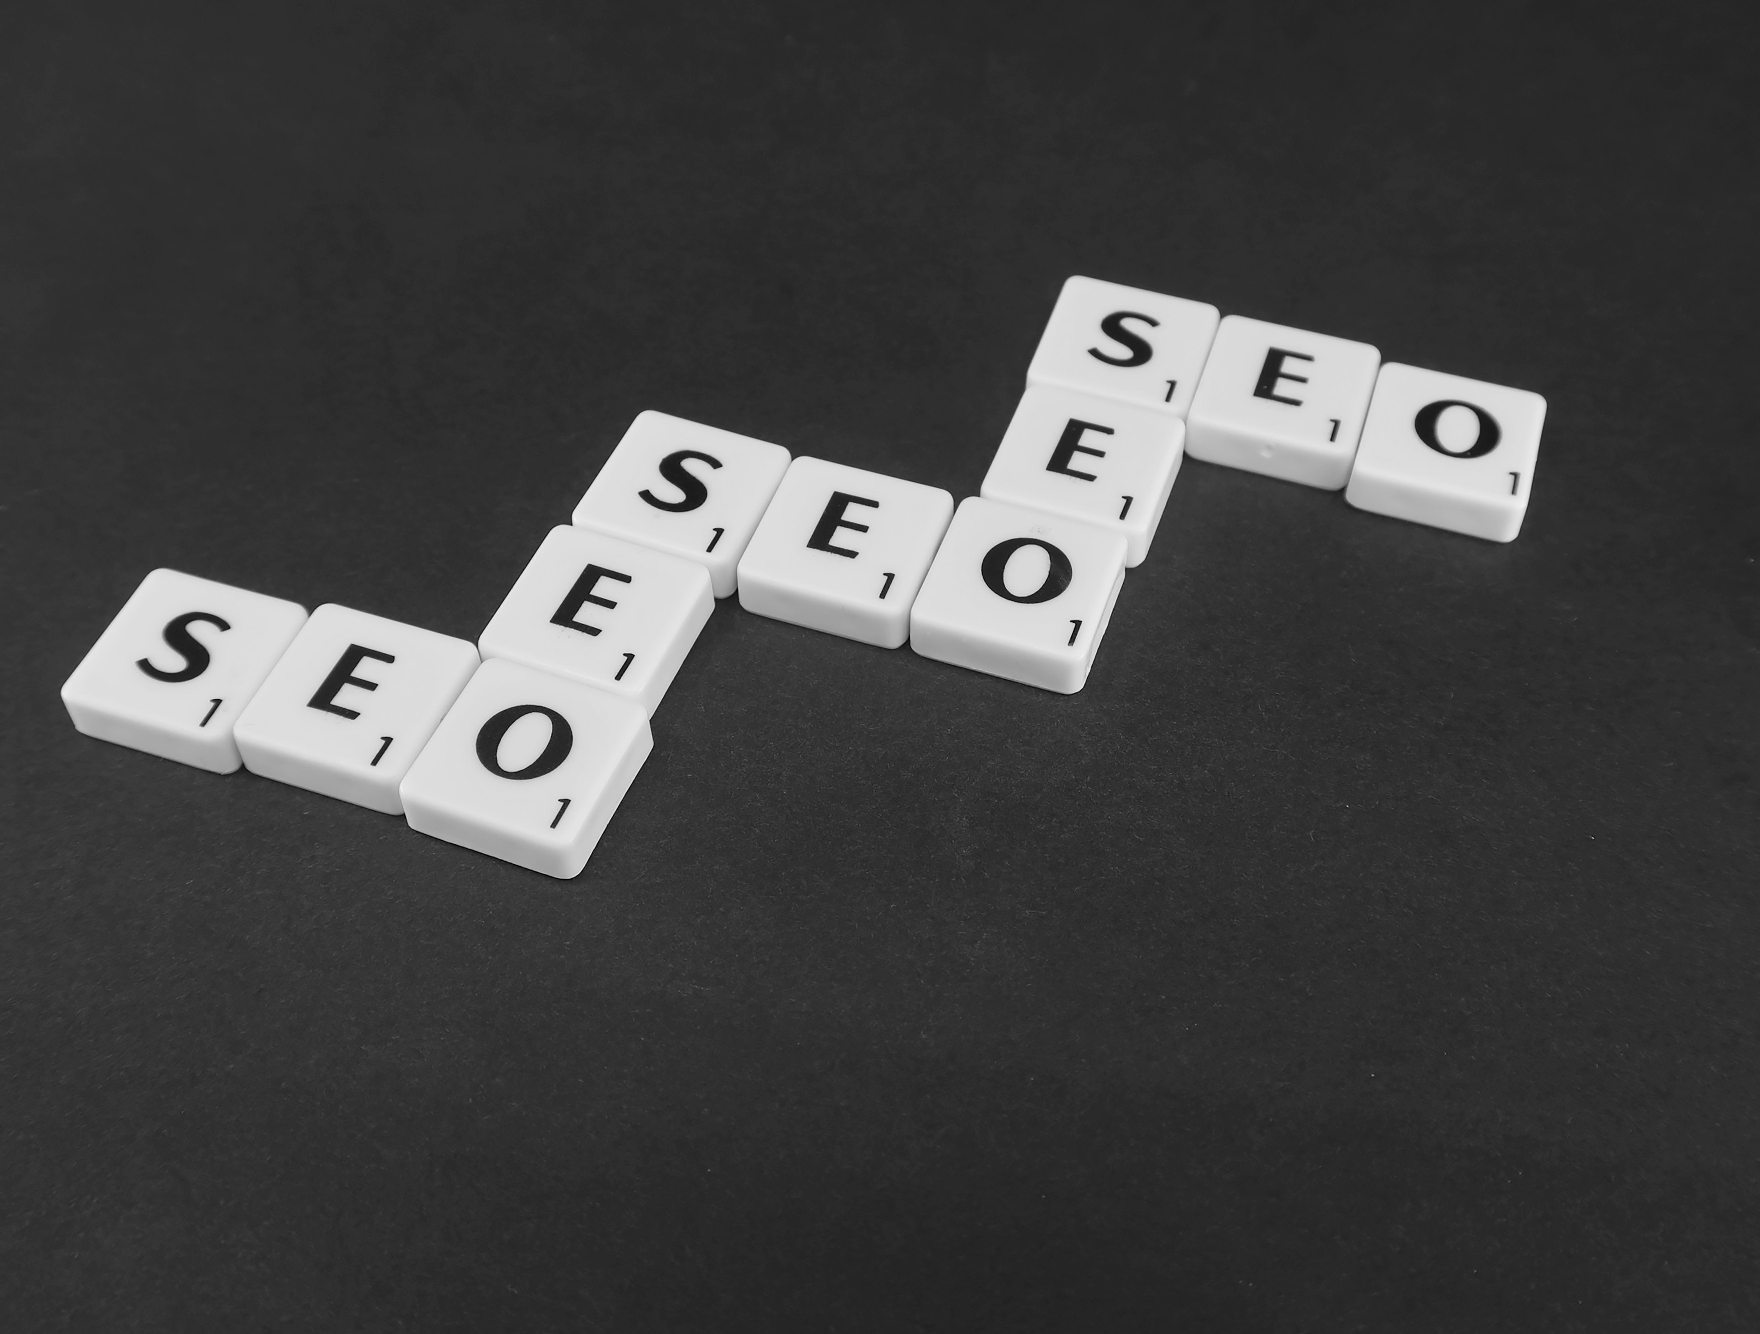 SEO Trends You Need To Know in 2022